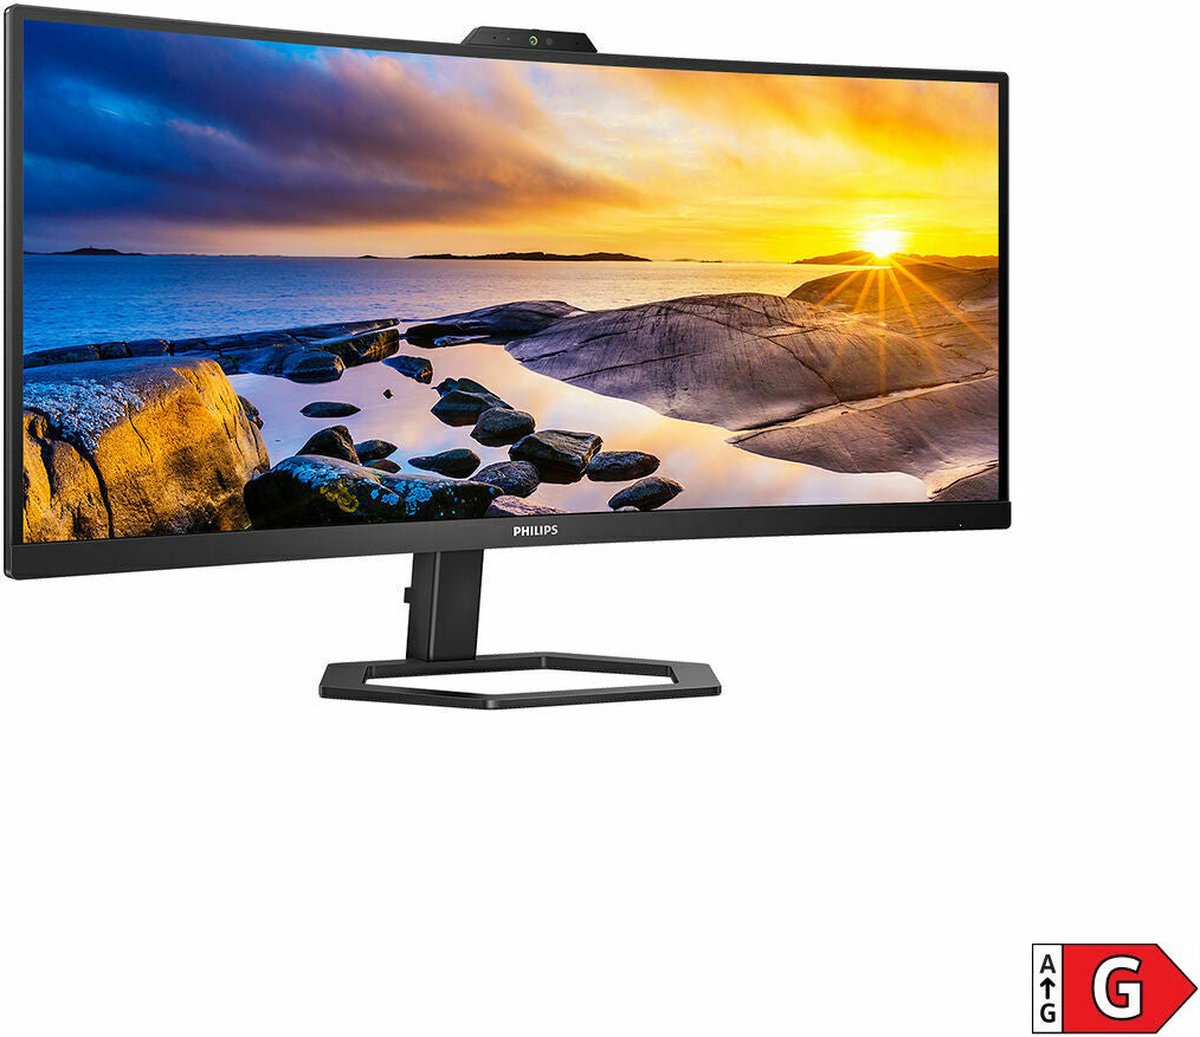 PHILIPS 34E1C5600HE 34 UltraWide QHD 21:9 Monitor with Built-in Windows  Hello Webcam & Noise Canceling Mic, USB-C Docking, Stereo Speakers, 100Hz